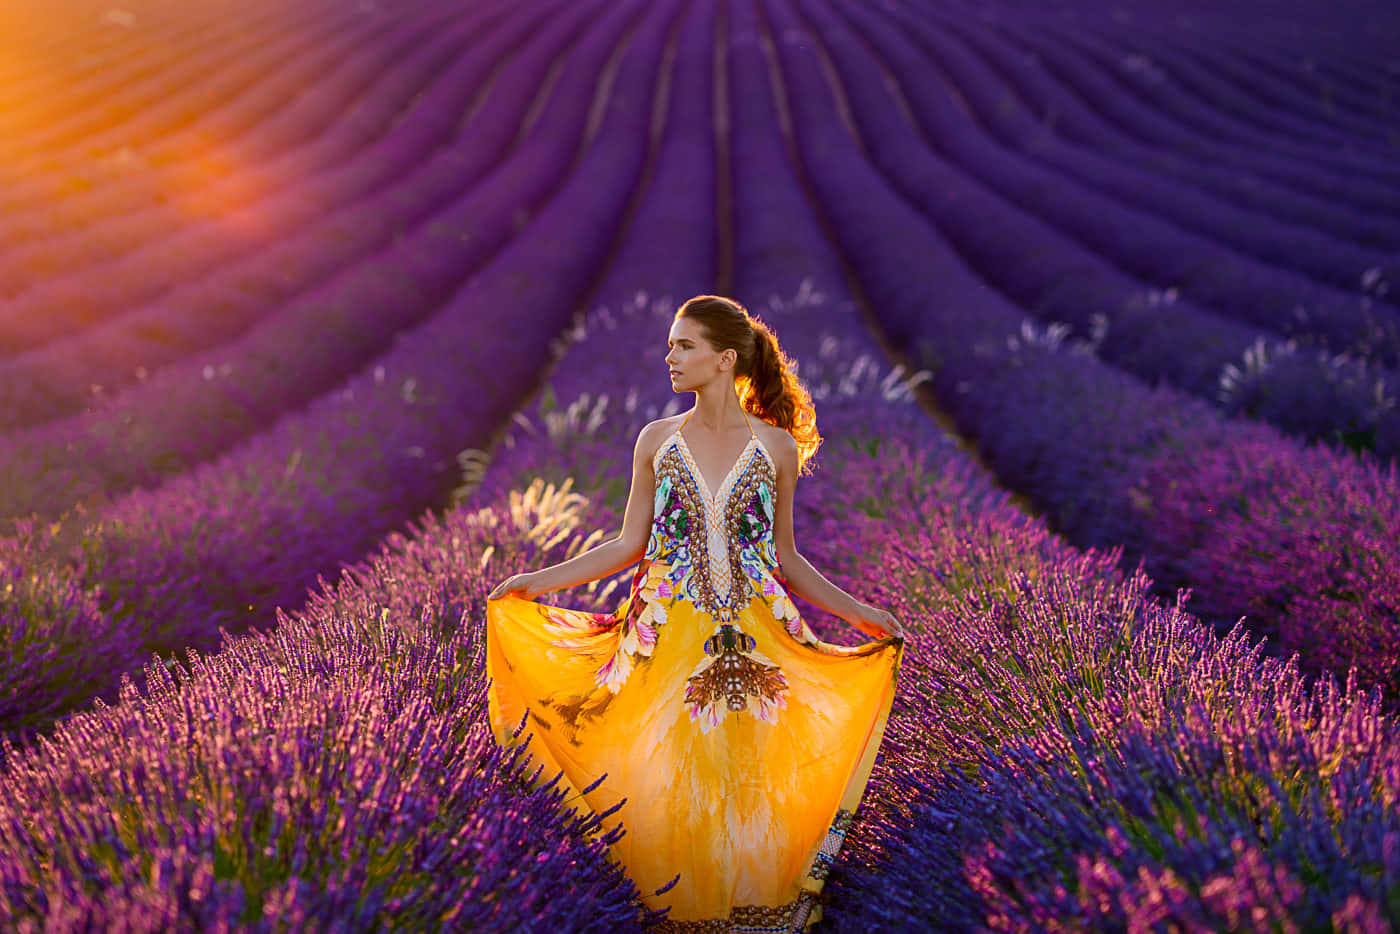 A Woman In A Yellow Dress Standing In A Lavender Field